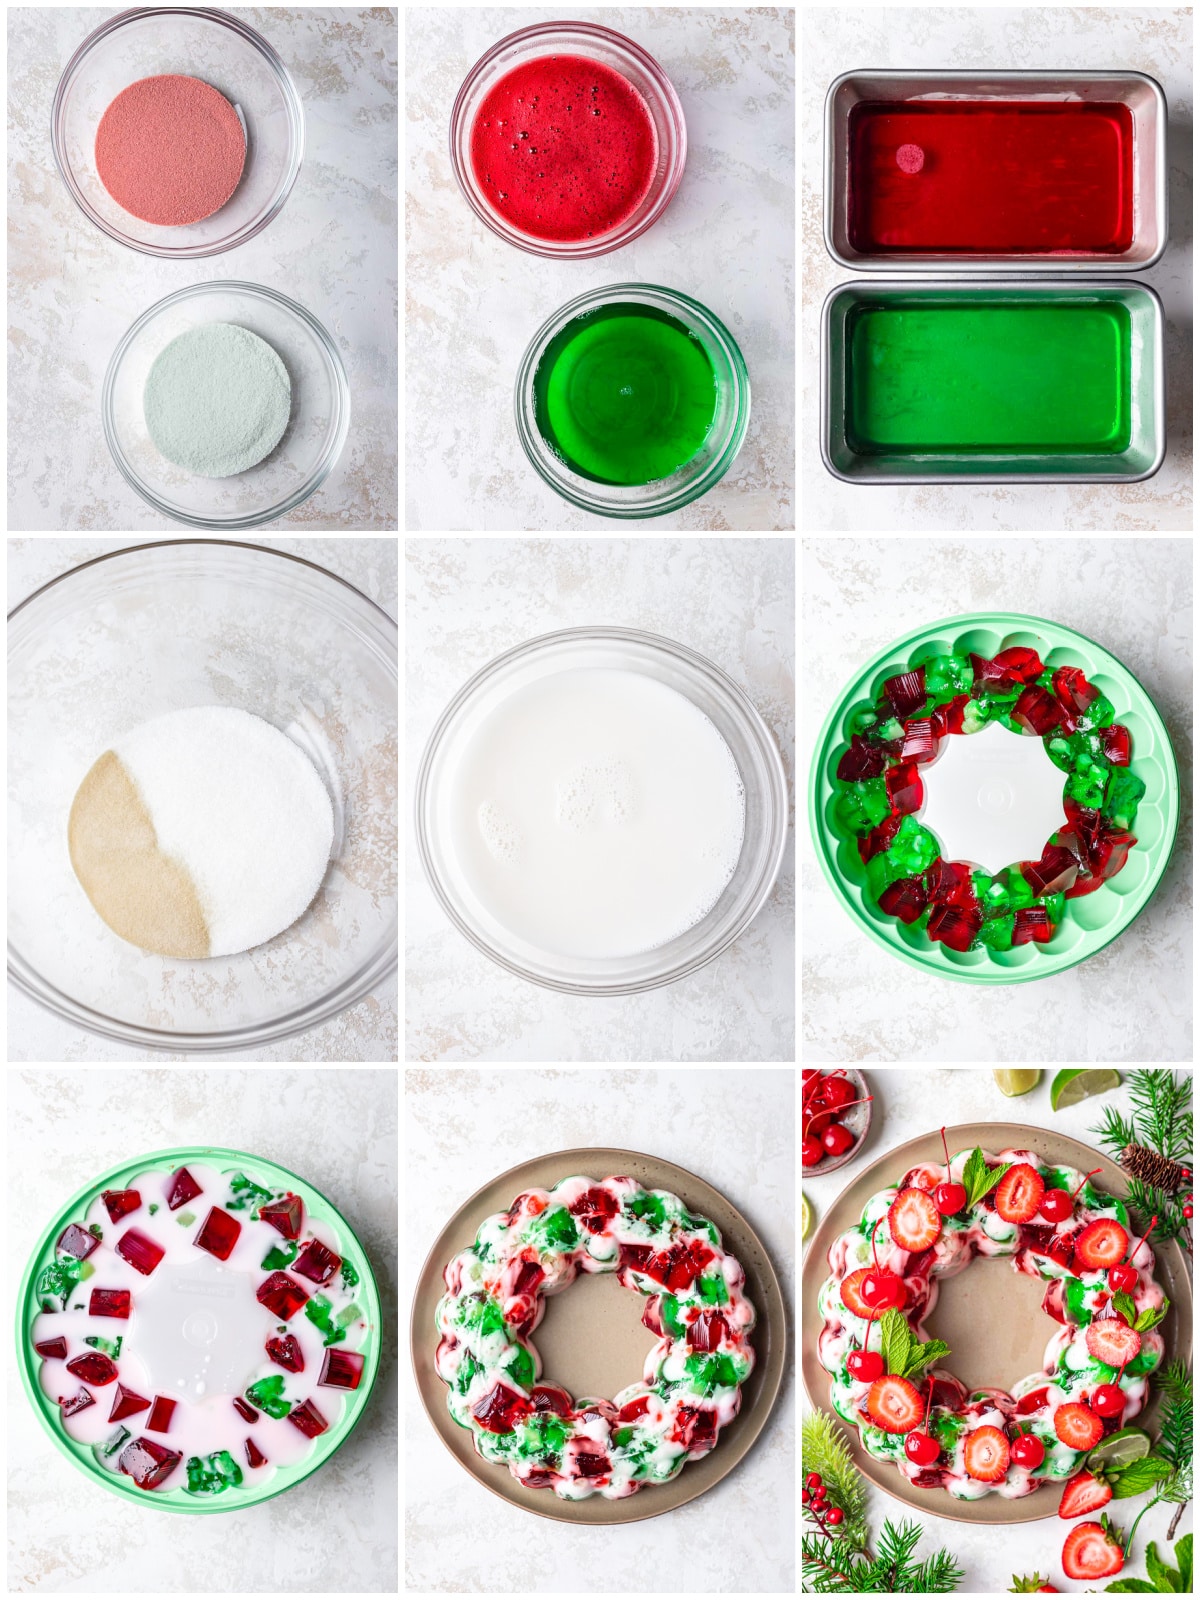 Step by step photos on how to make a Christmas Jello Salad.